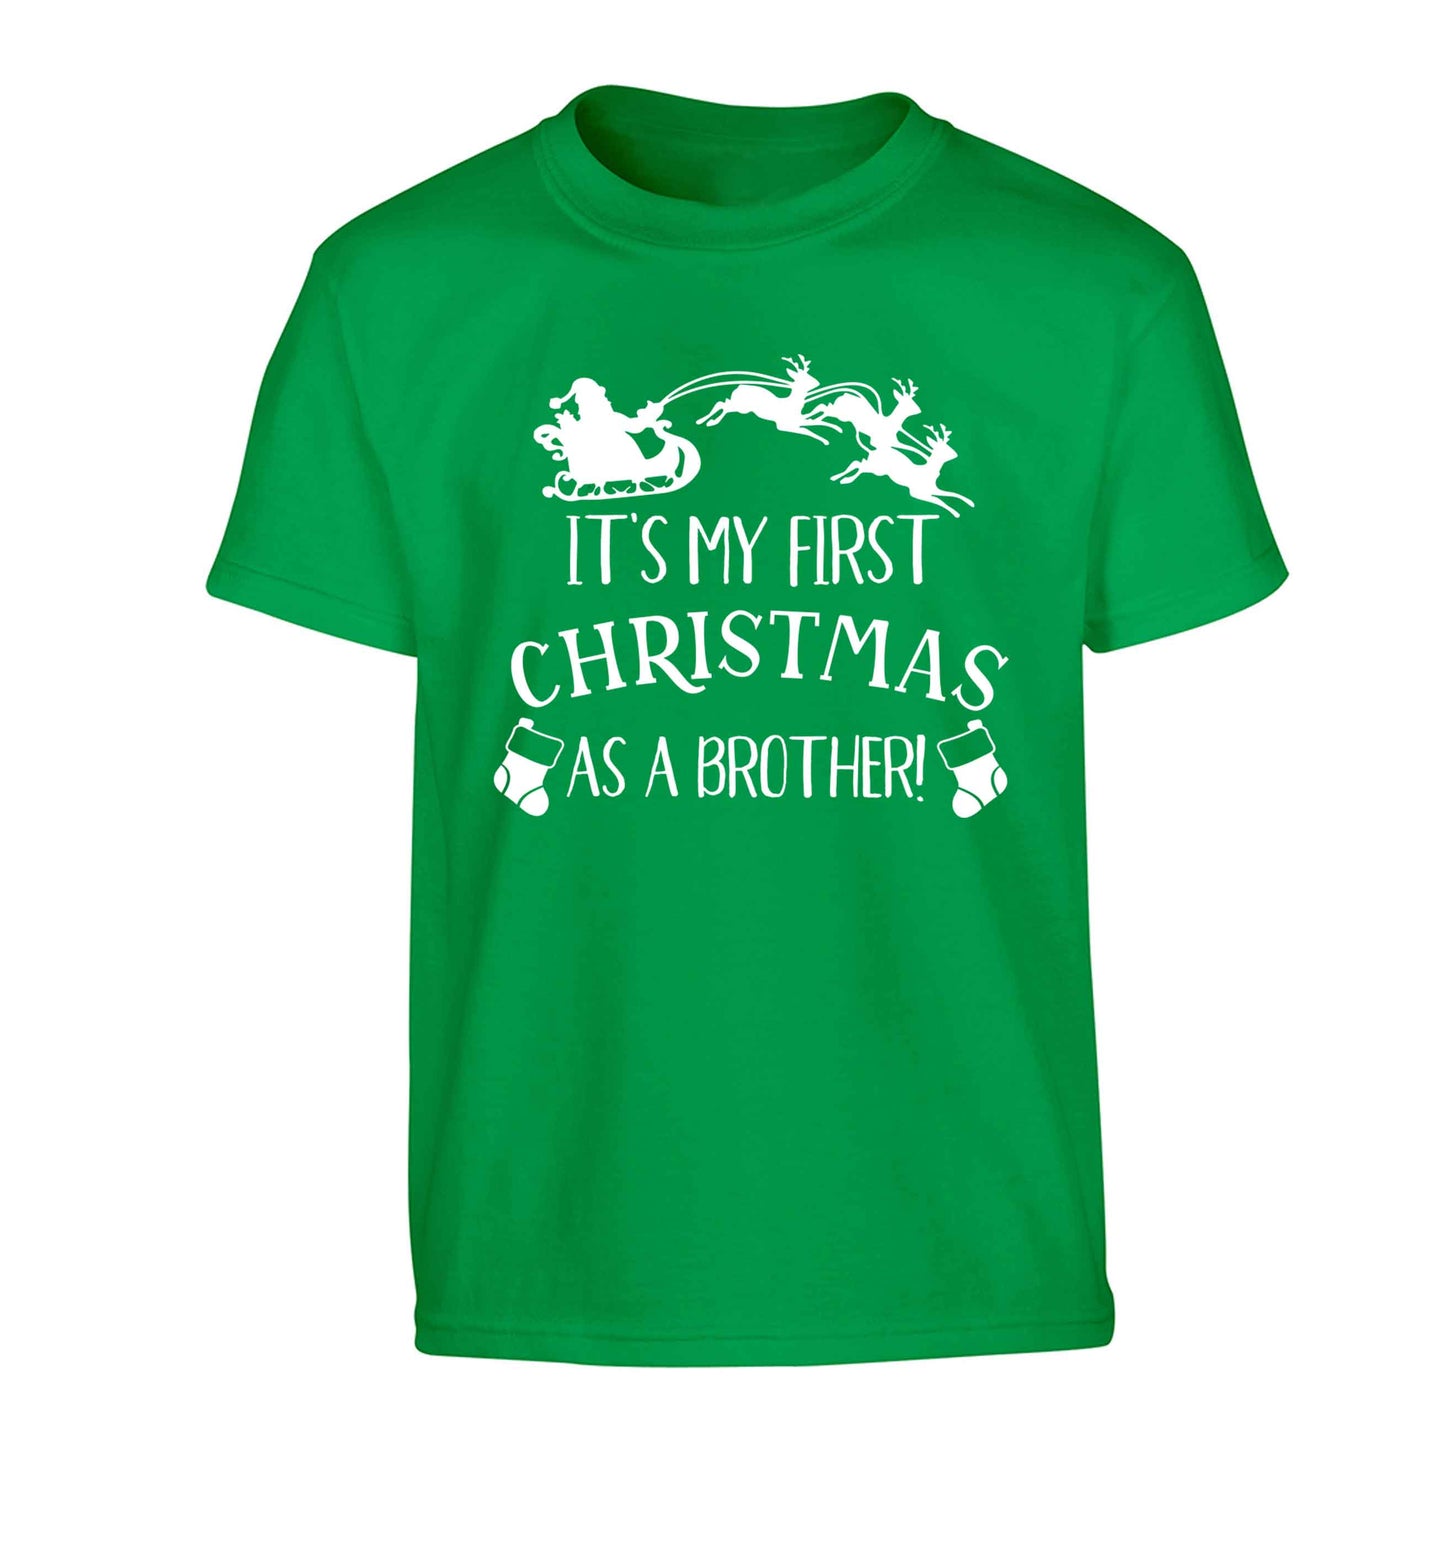 It's my first Christmas as a brother! Children's green Tshirt 12-13 Years